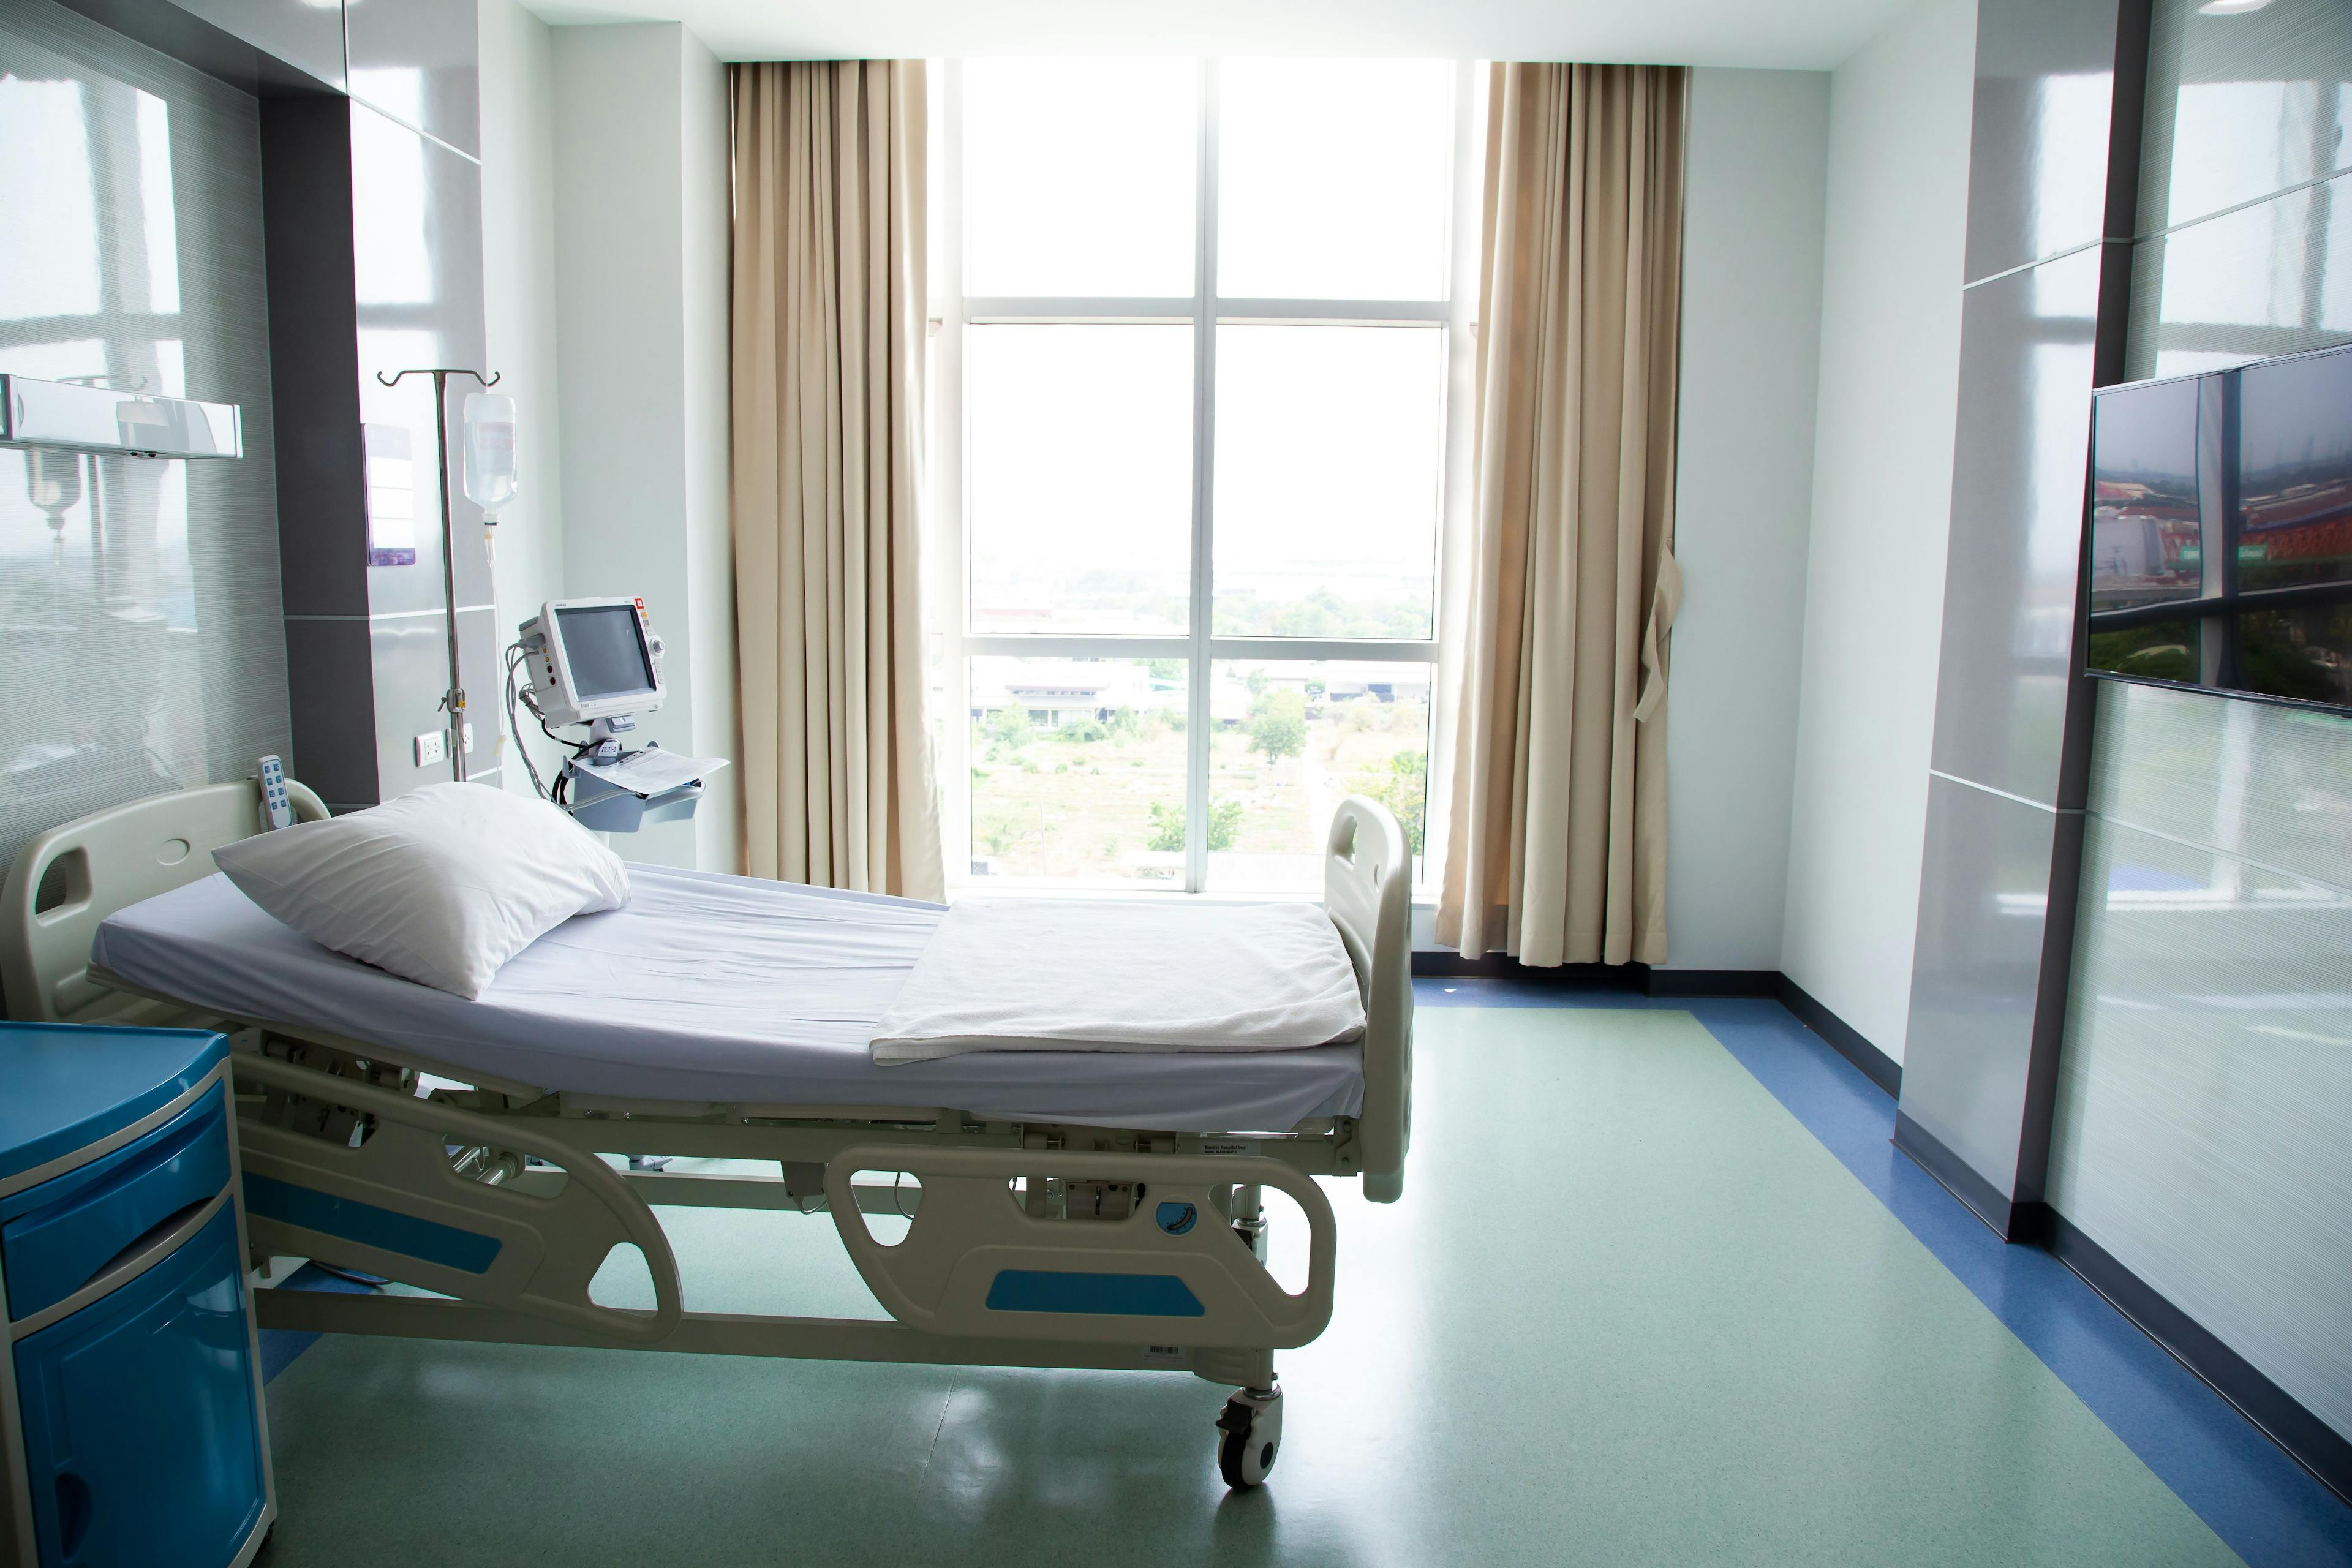 Hospitals need visibility of their assets to reduce the risk of lost and stolen medical devices. (Image credit: ©NVB Stocker - stock.adobe.com)